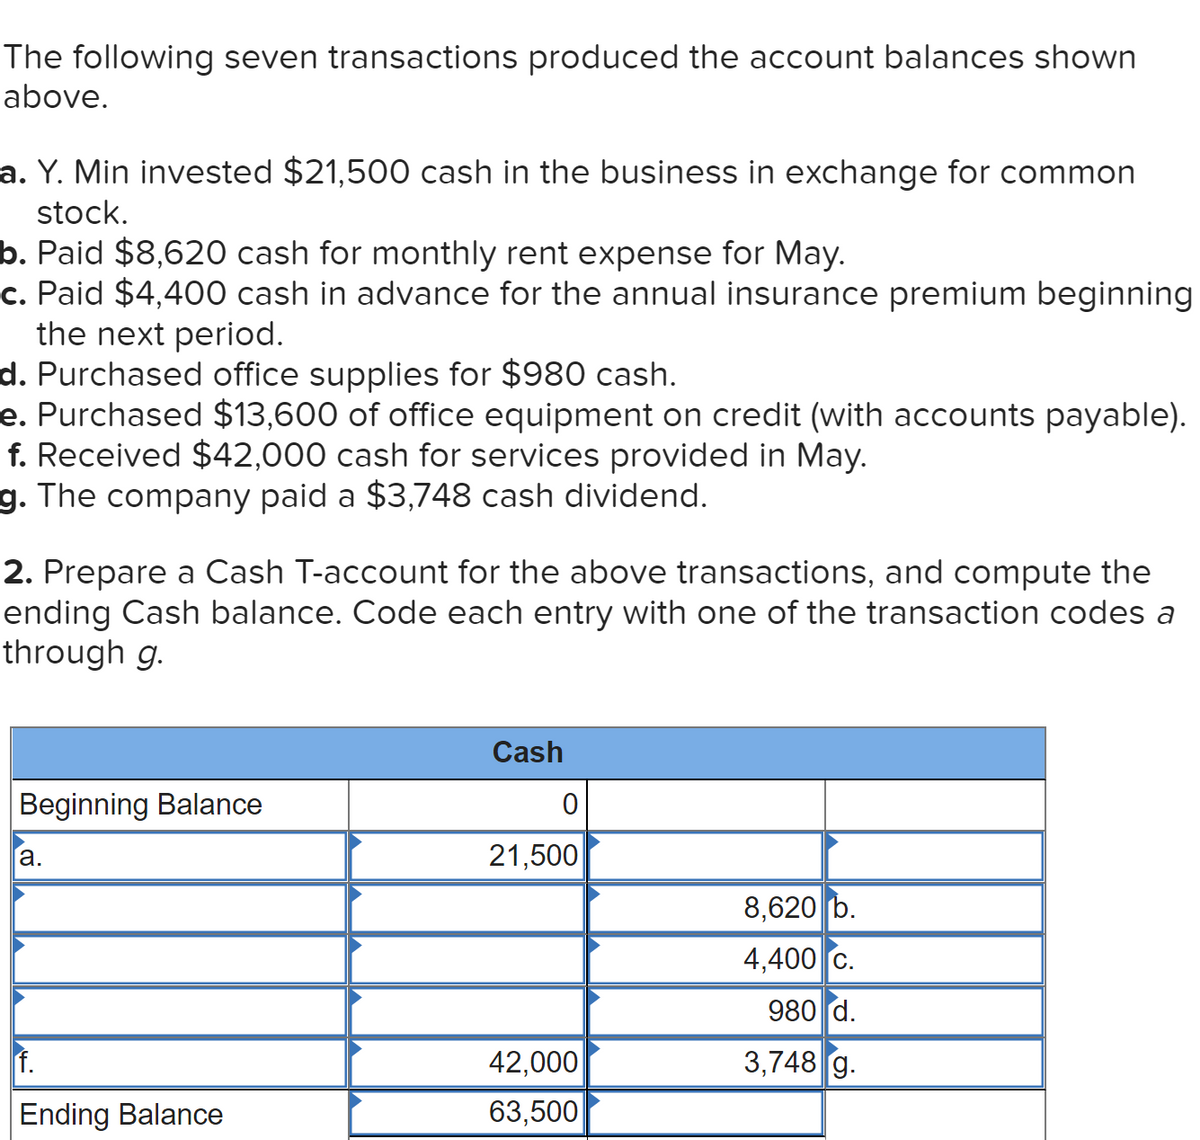 The following seven transactions produced the account balances shown
above.
a. Y. Min invested $21,500 cash in the business in exchange for common
stock.
b. Paid $8,620 cash for monthly rent expense for May.
c. Paid $4,400 cash in advance for the annual insurance premium beginning
the next period.
d. Purchased office supplies for $980 cash.
e. Purchased $13,600 of office equipment on credit (with accounts payable).
f. Received $42,000 cash for services provided in May.
g. The company paid a $3,748 cash dividend.
2. Prepare a Cash T-account for the above transactions, and compute the
ending Cash balance. Code each entry with one of the transaction codes a
through g.
Beginning Balance
a.
f.
Ending Balance
Cash
0
21,500
42,000
63,500
8,620 b.
4,400 C.
980 d.
3,748 g.